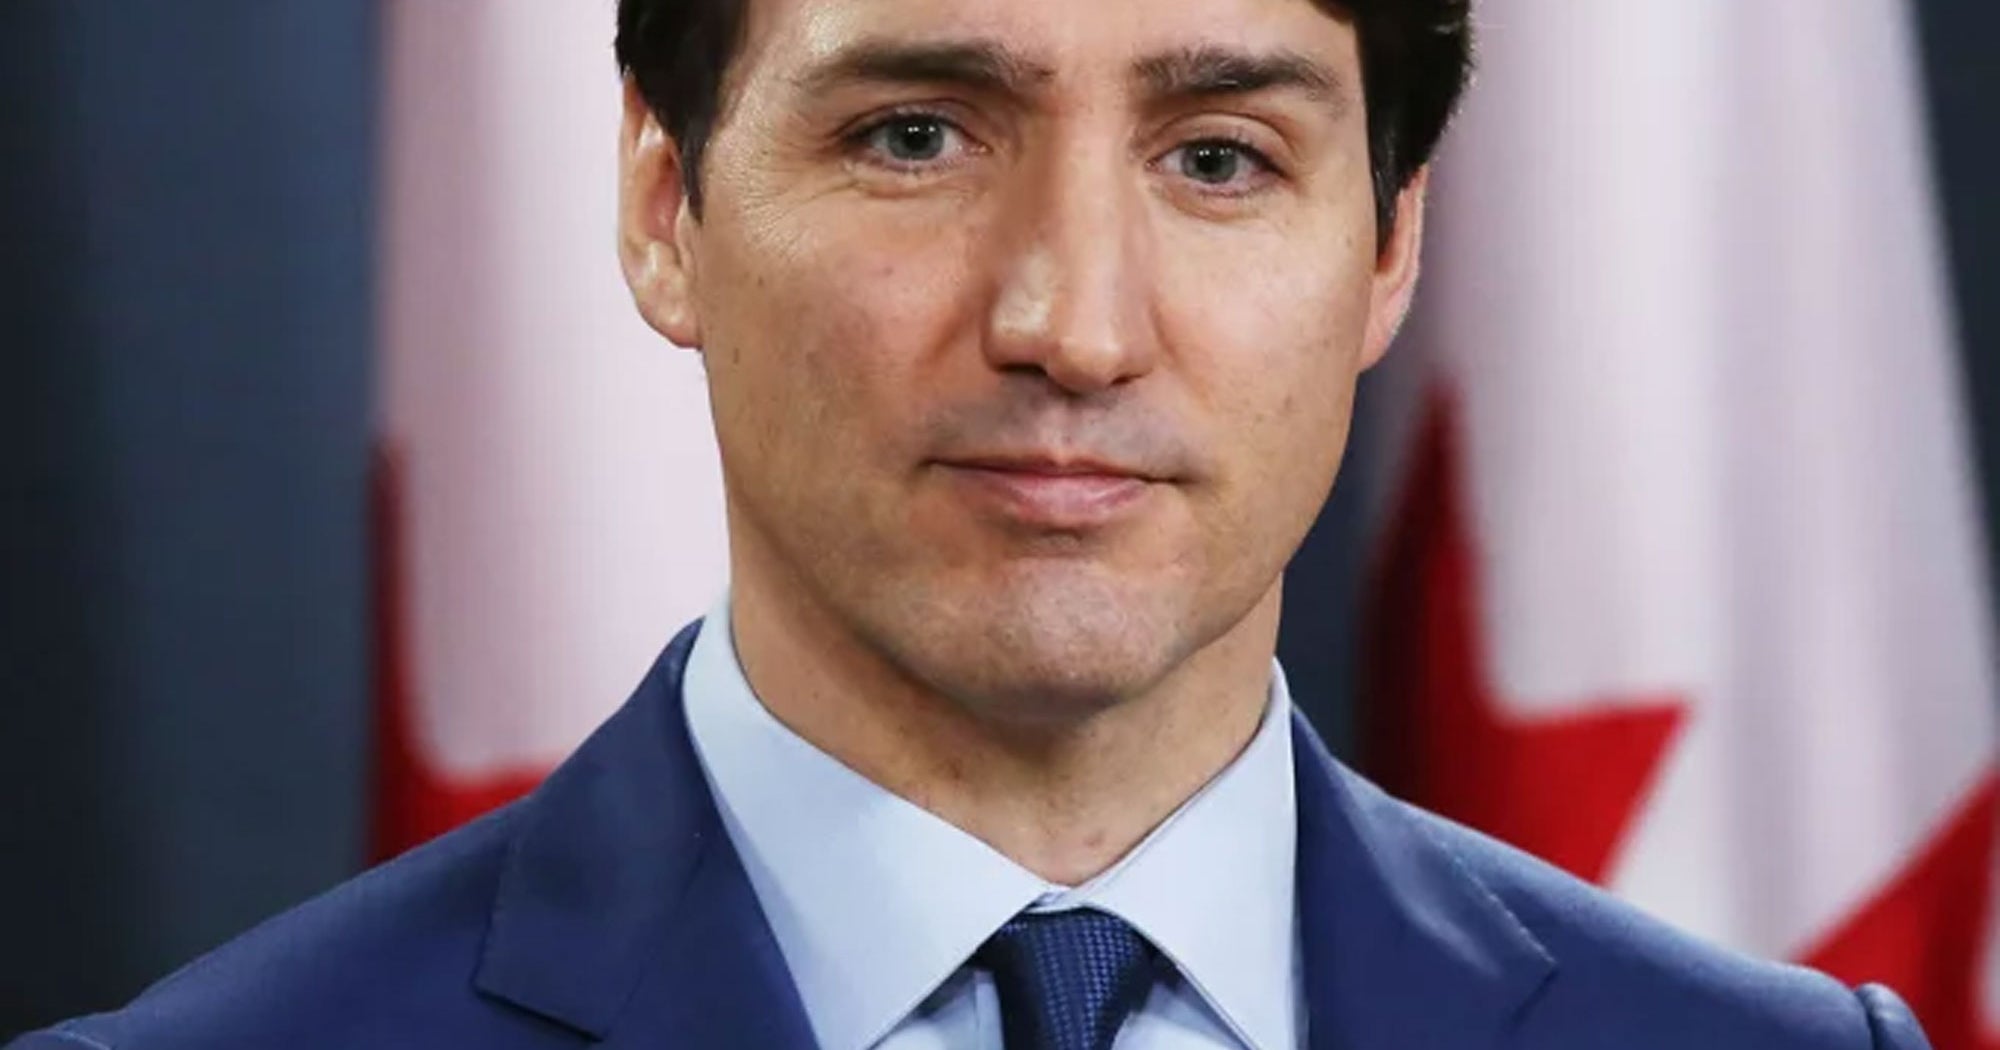 Justin Trudeau Net Worth: What The Prime Minister Makes